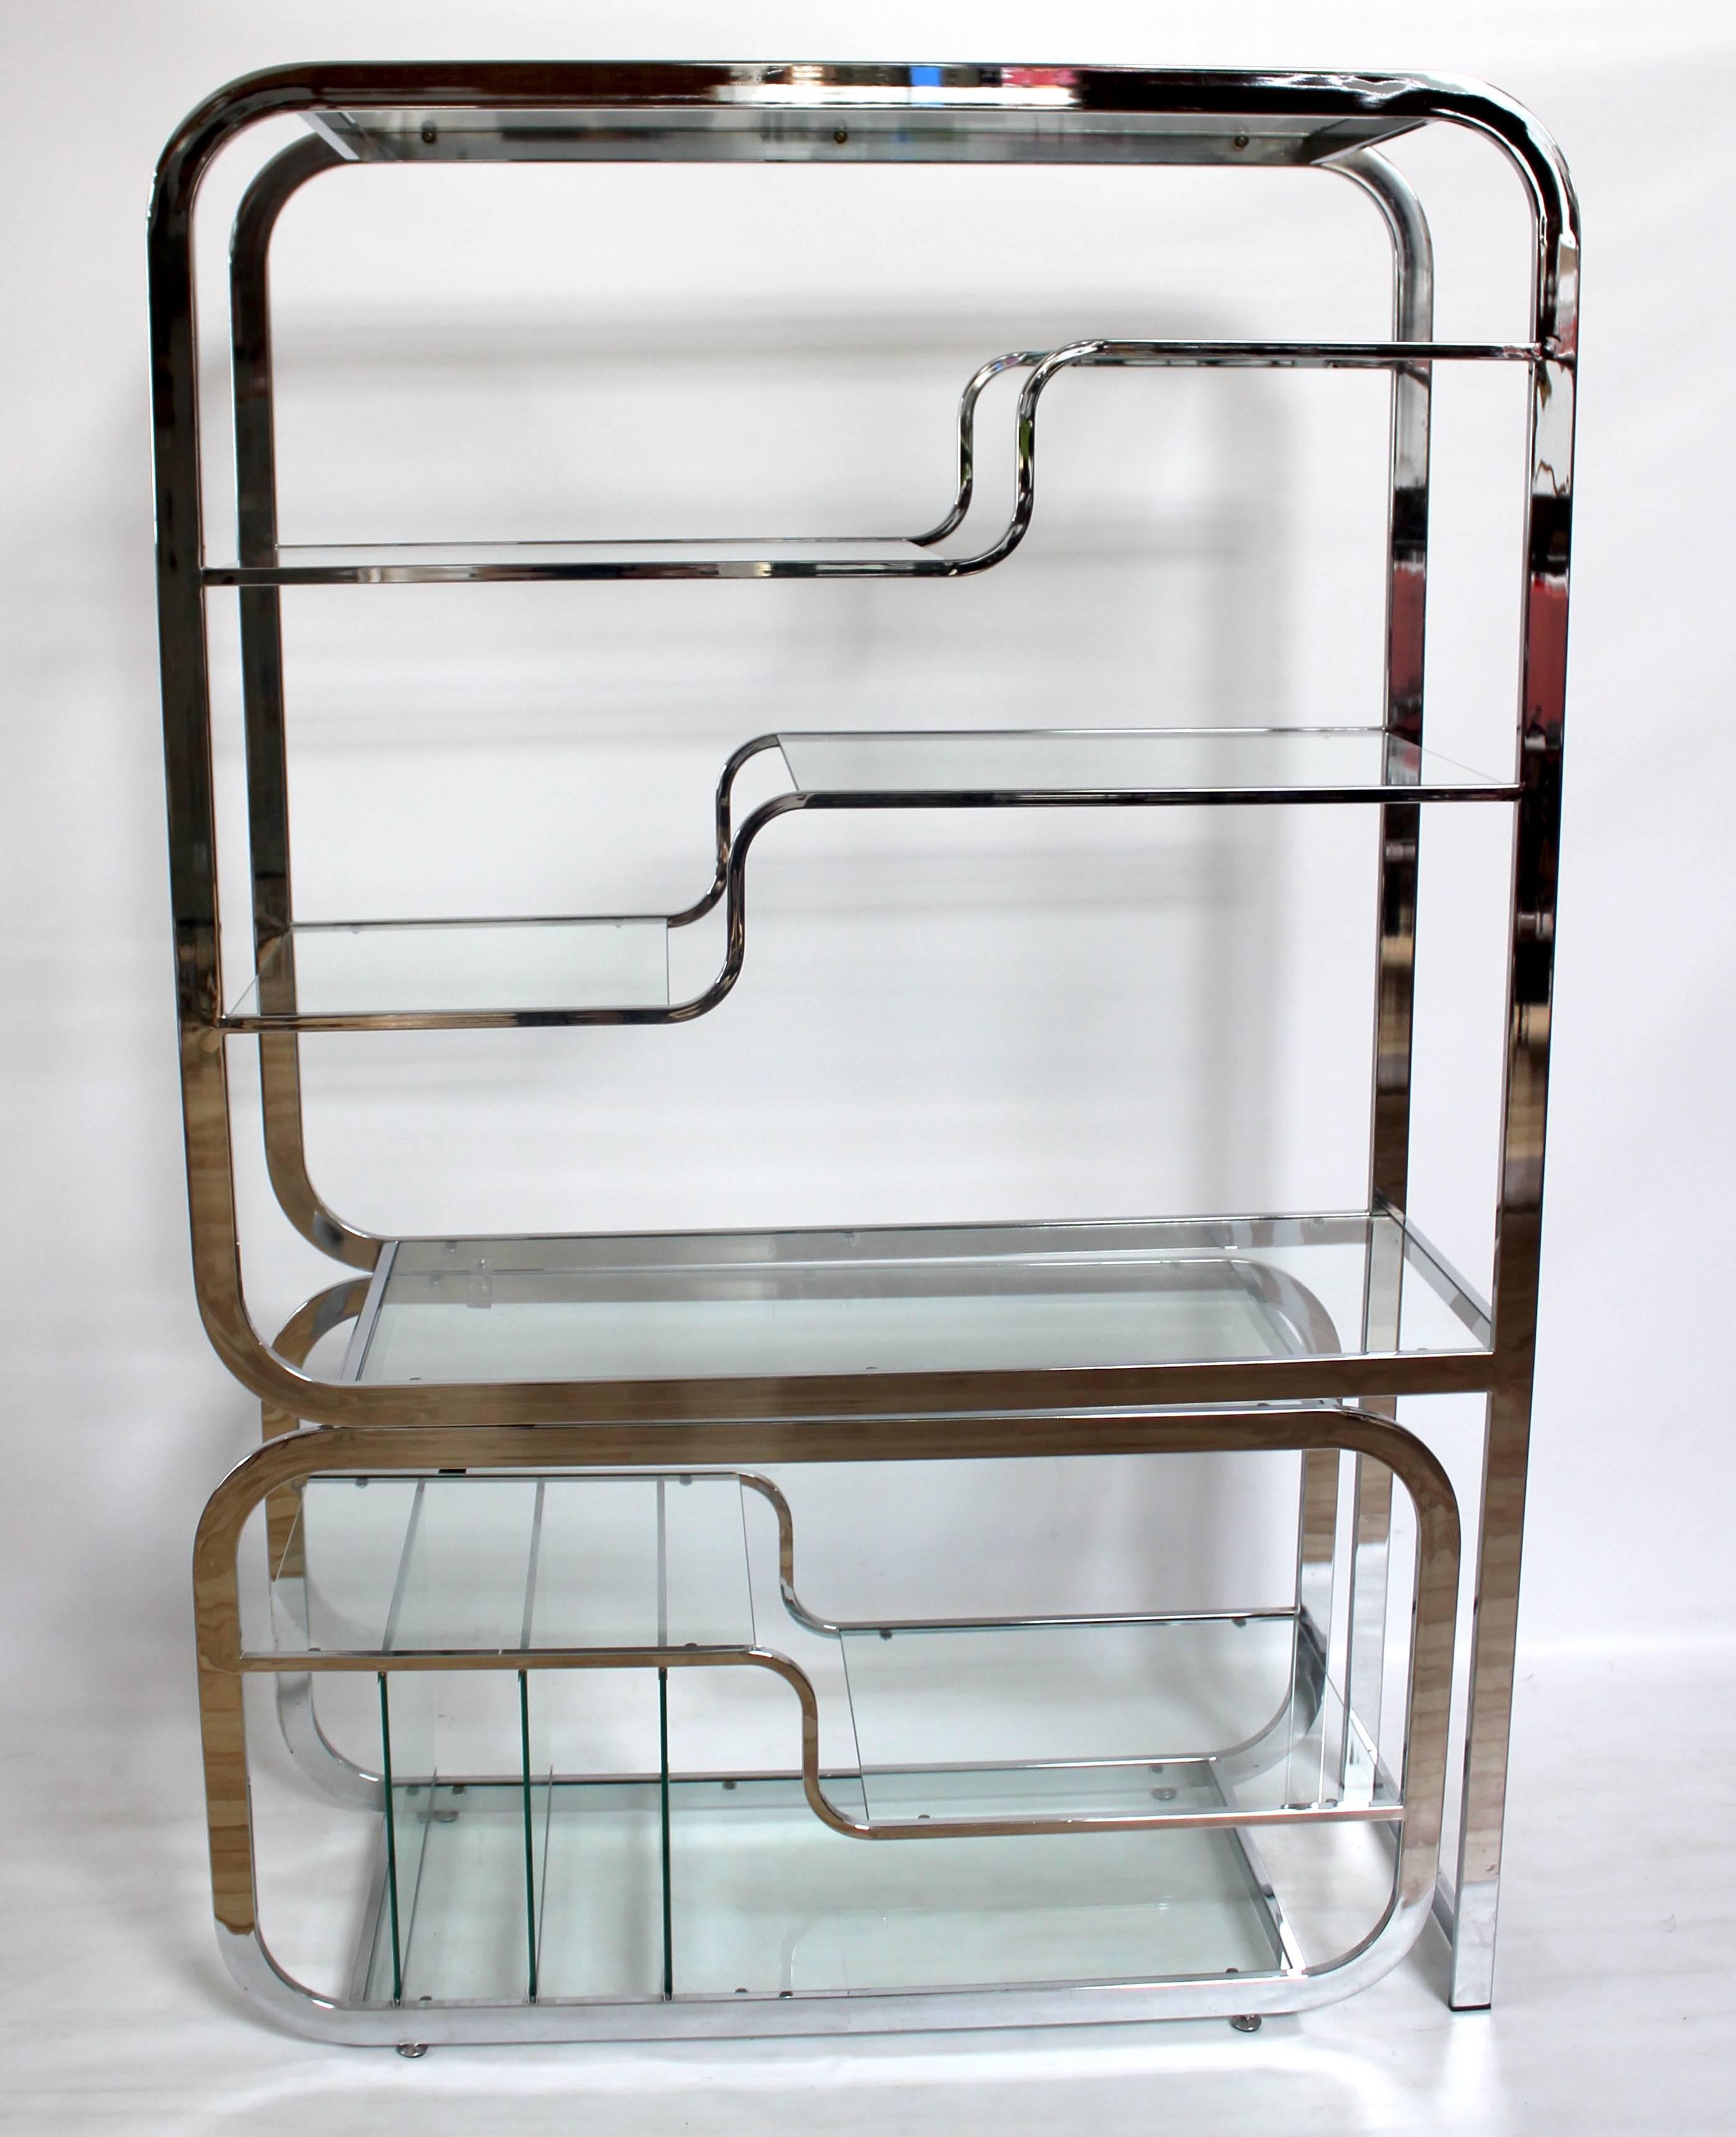 1970s chrome and glass etagere designed by Milo Baughman. The bottom section extends out from the body and features vertical glass record/magazine dividers.